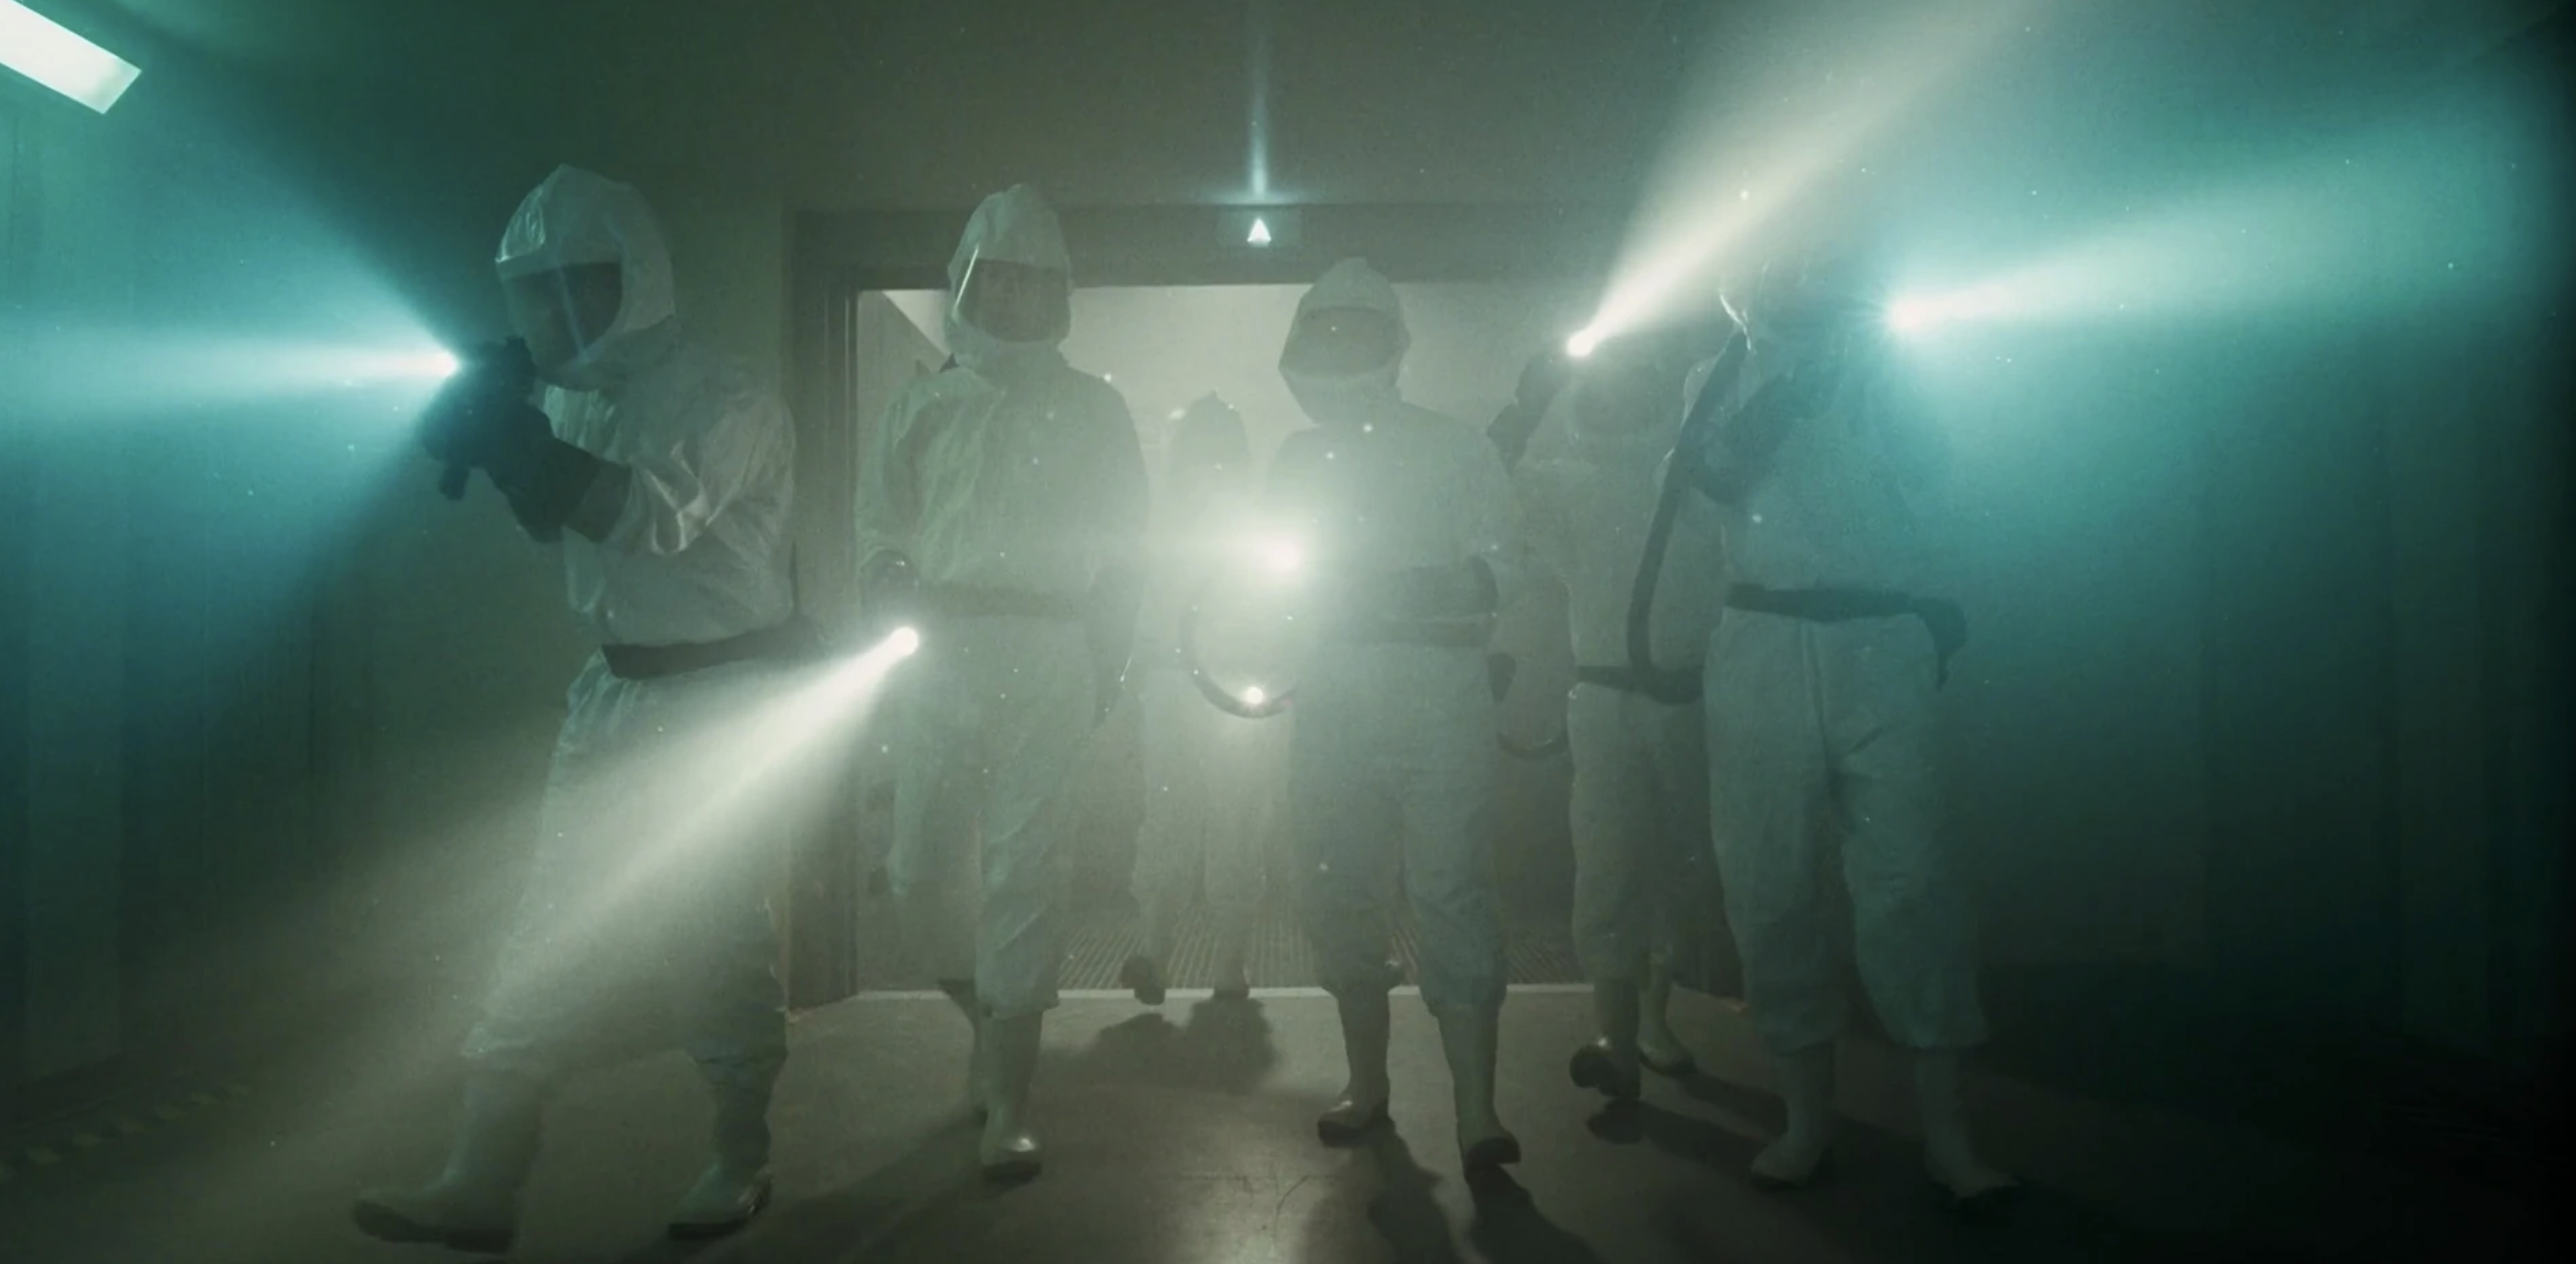 People in hazmat suits and flashlights